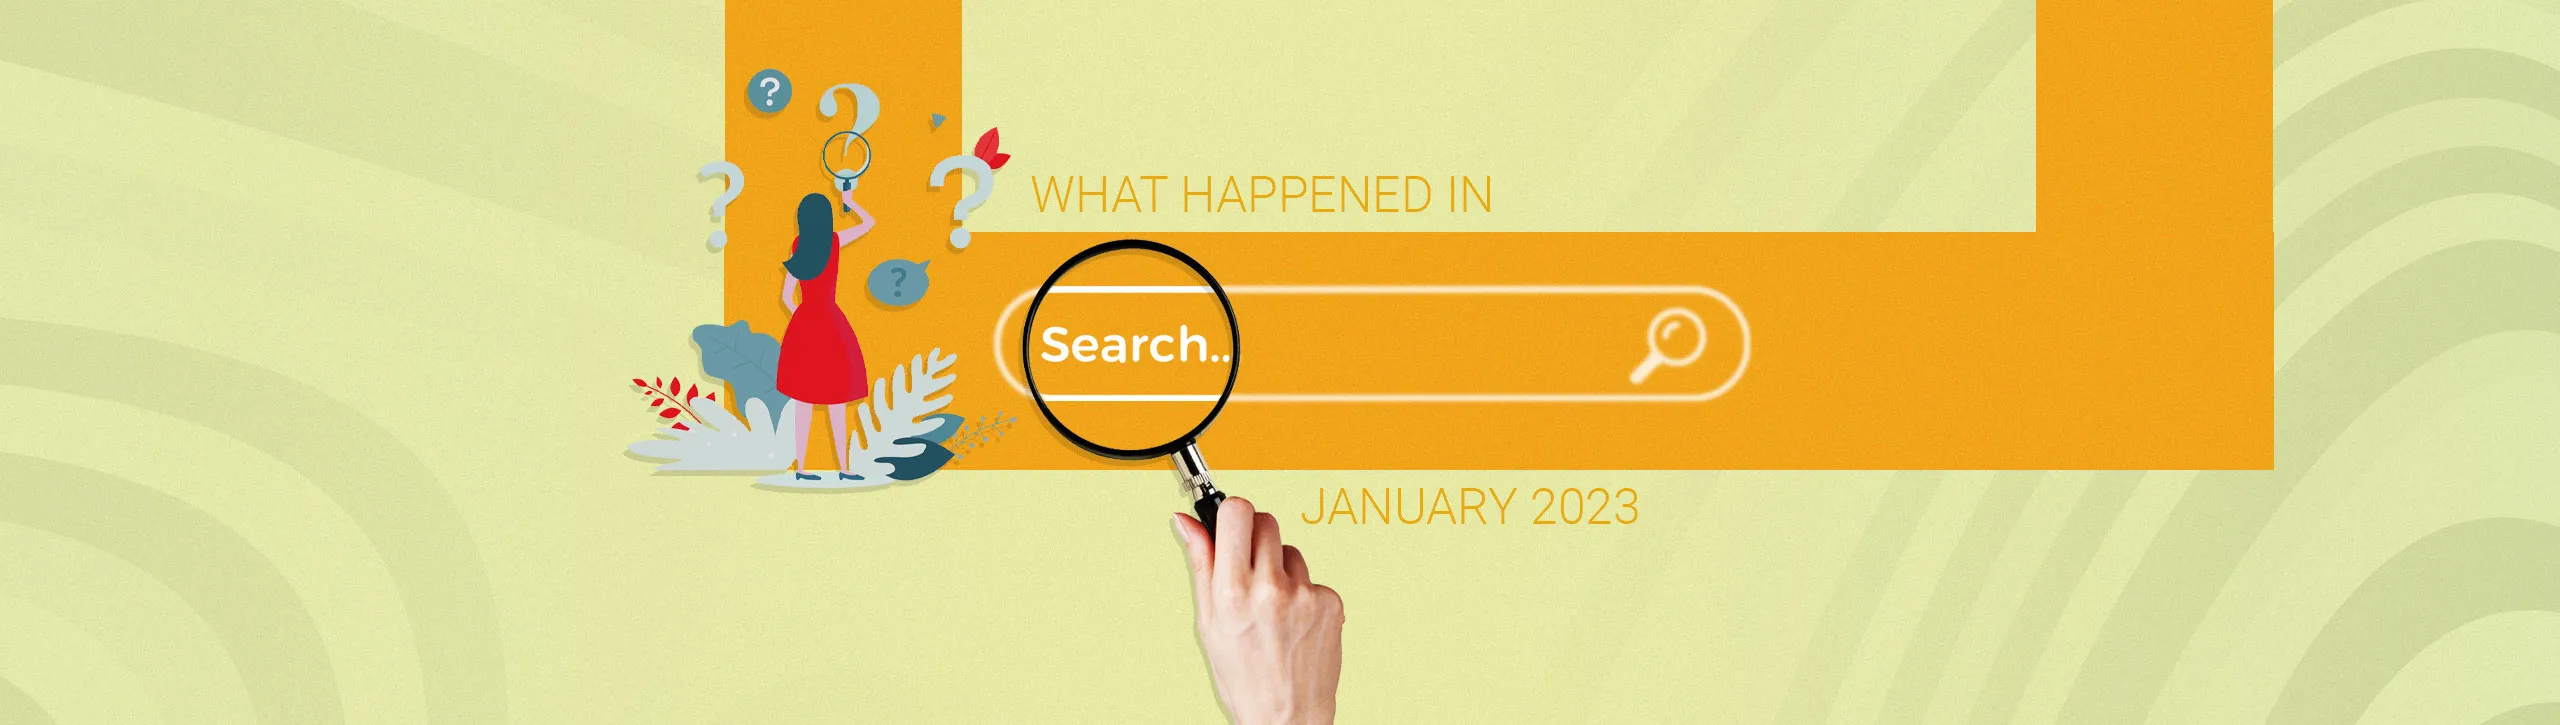 Search-Round-Up-January-2023-Blog-Header